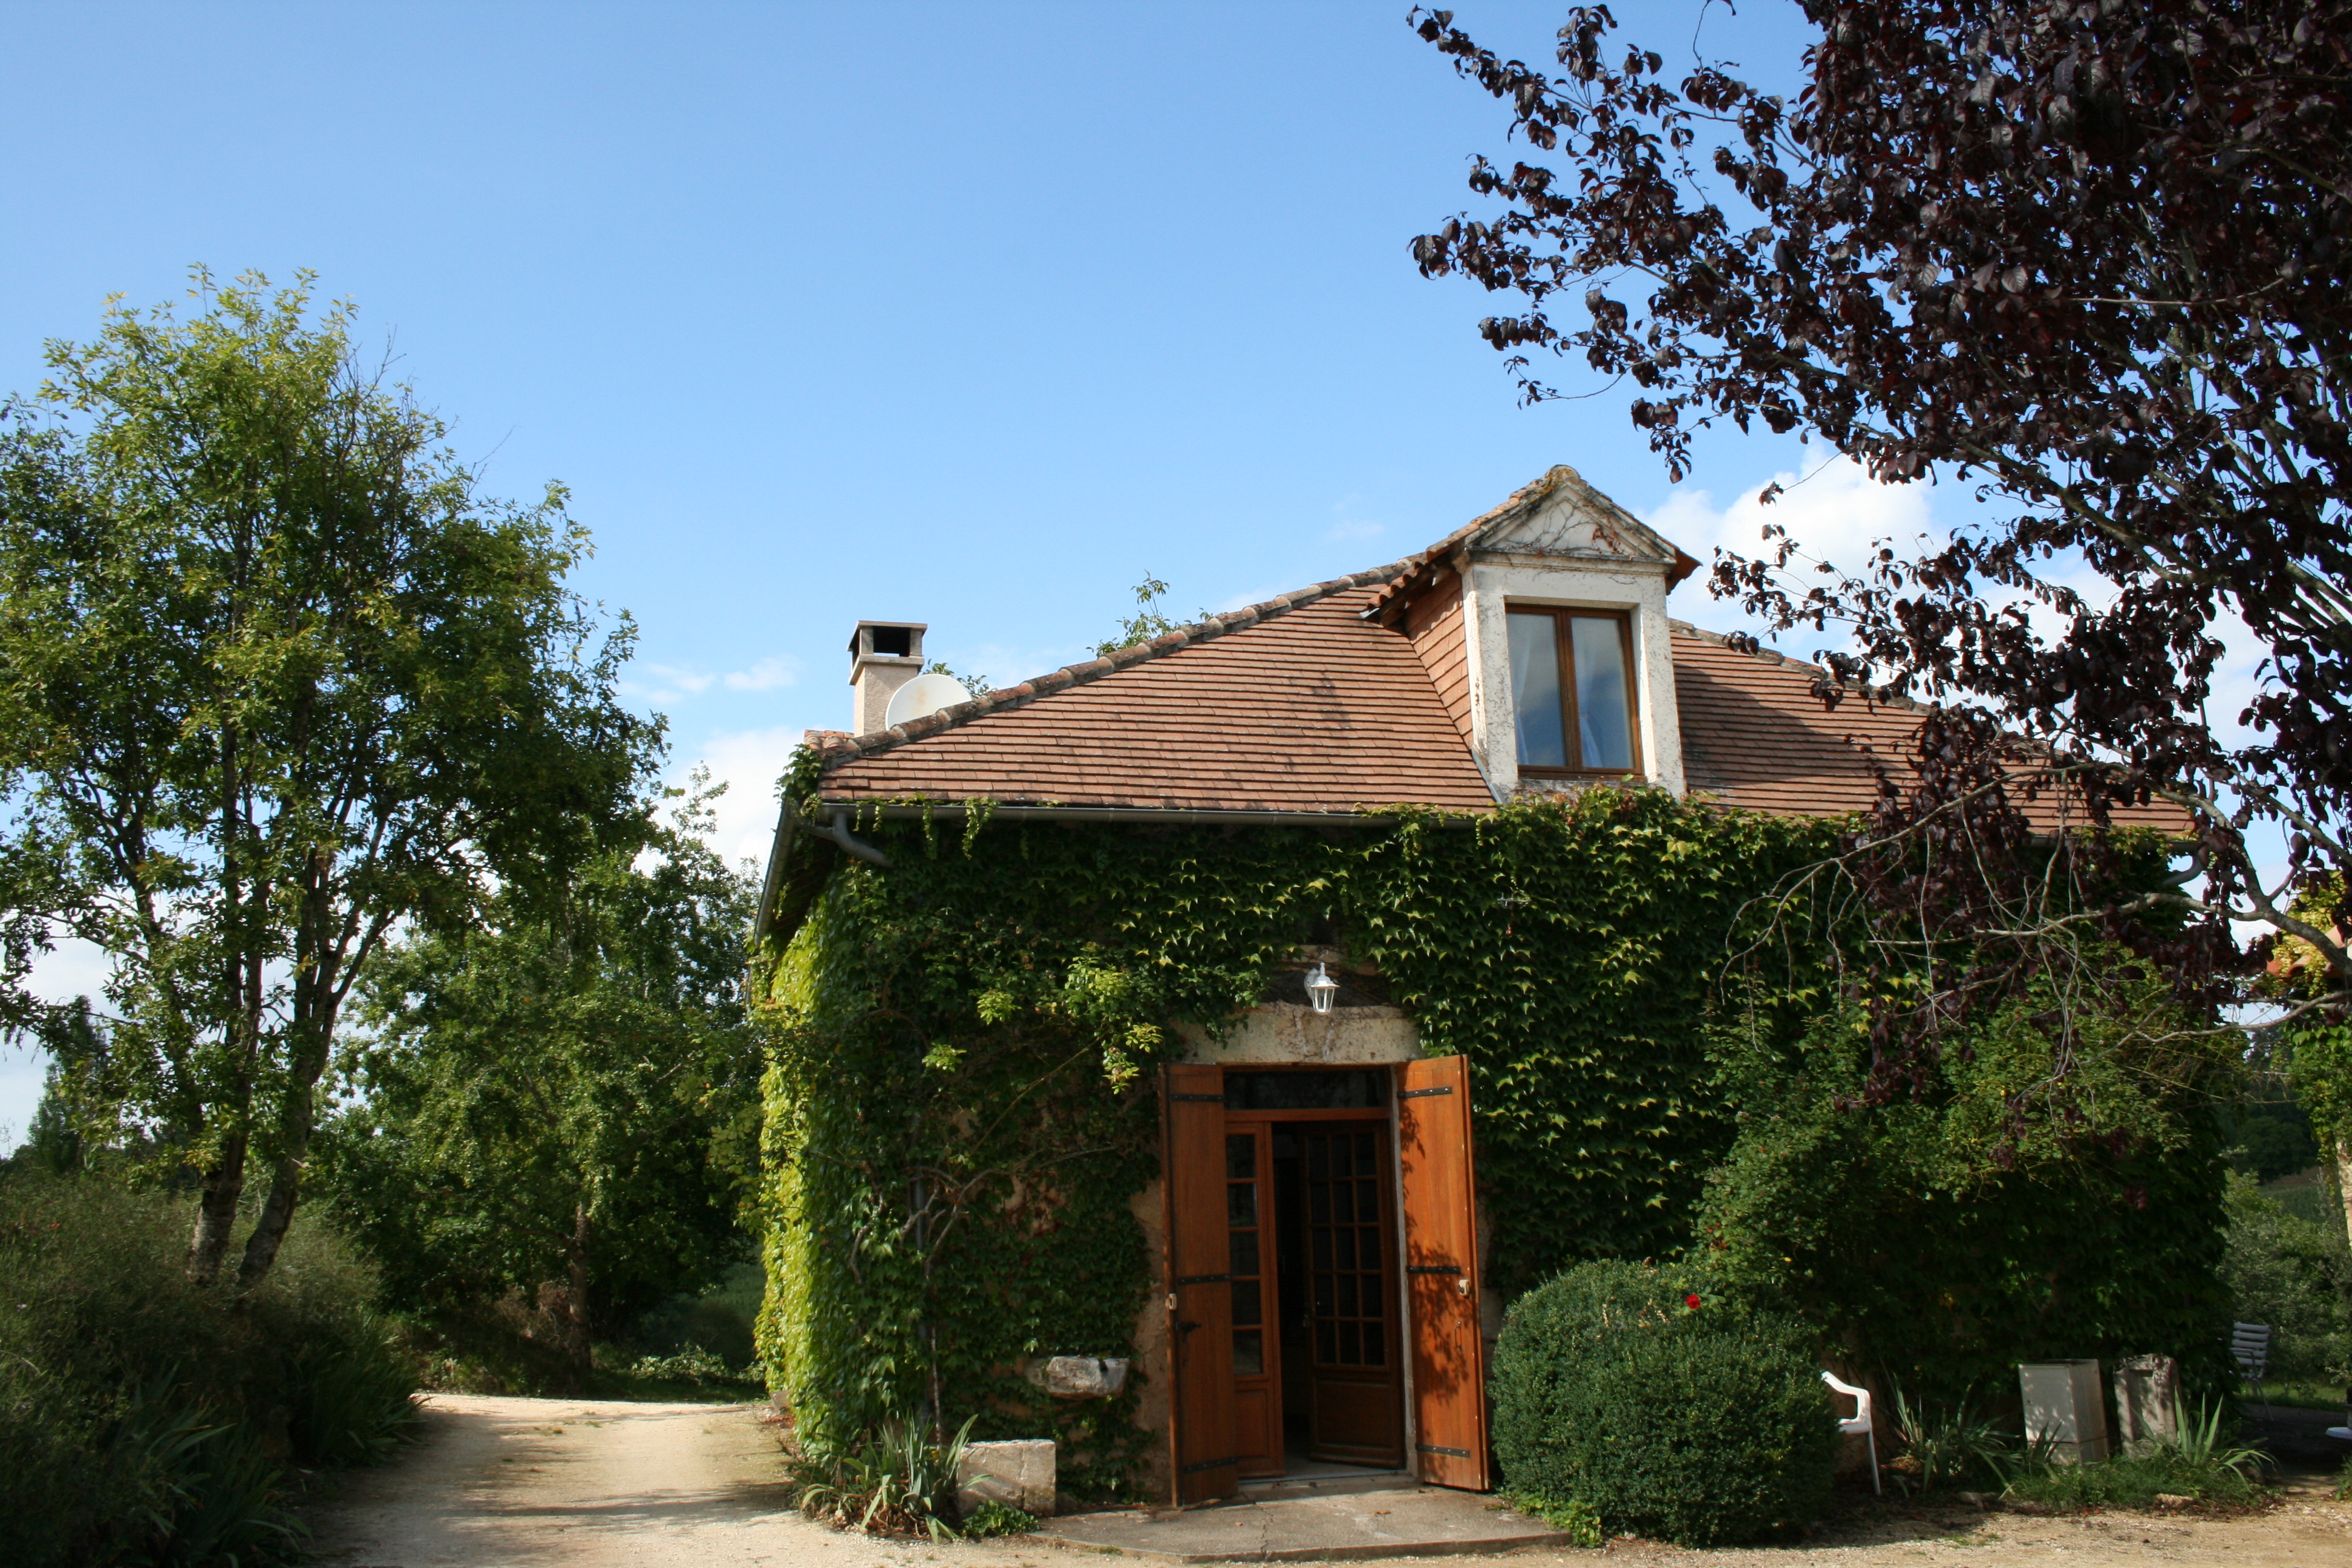 Our charming stone cottage offers the perfect retreat for your next vacation in Dordogne